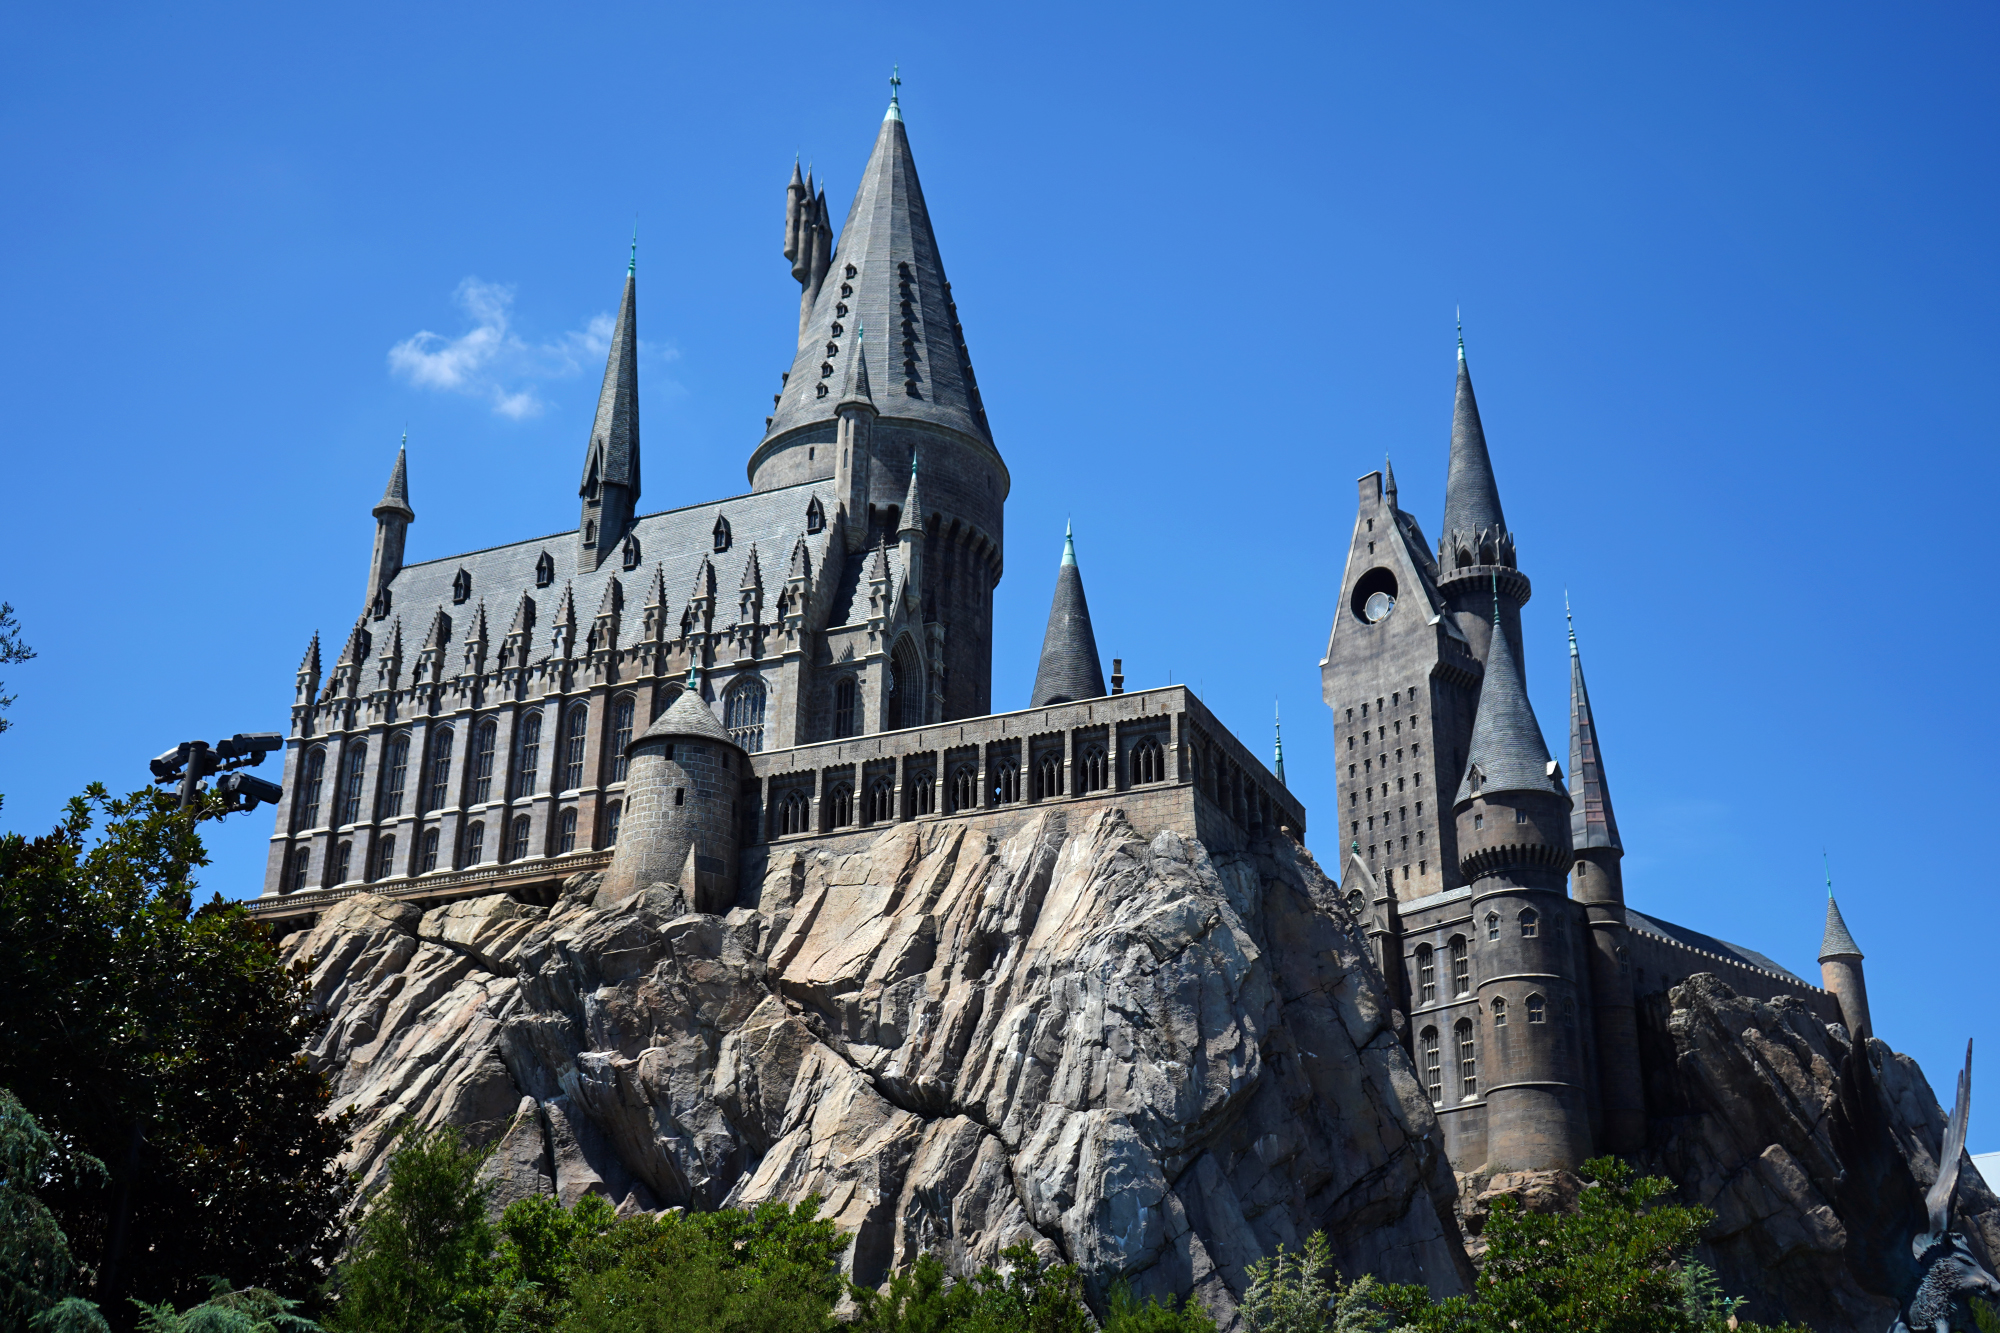 Universal Orlando's Harry Potter and the Forbidden Journey